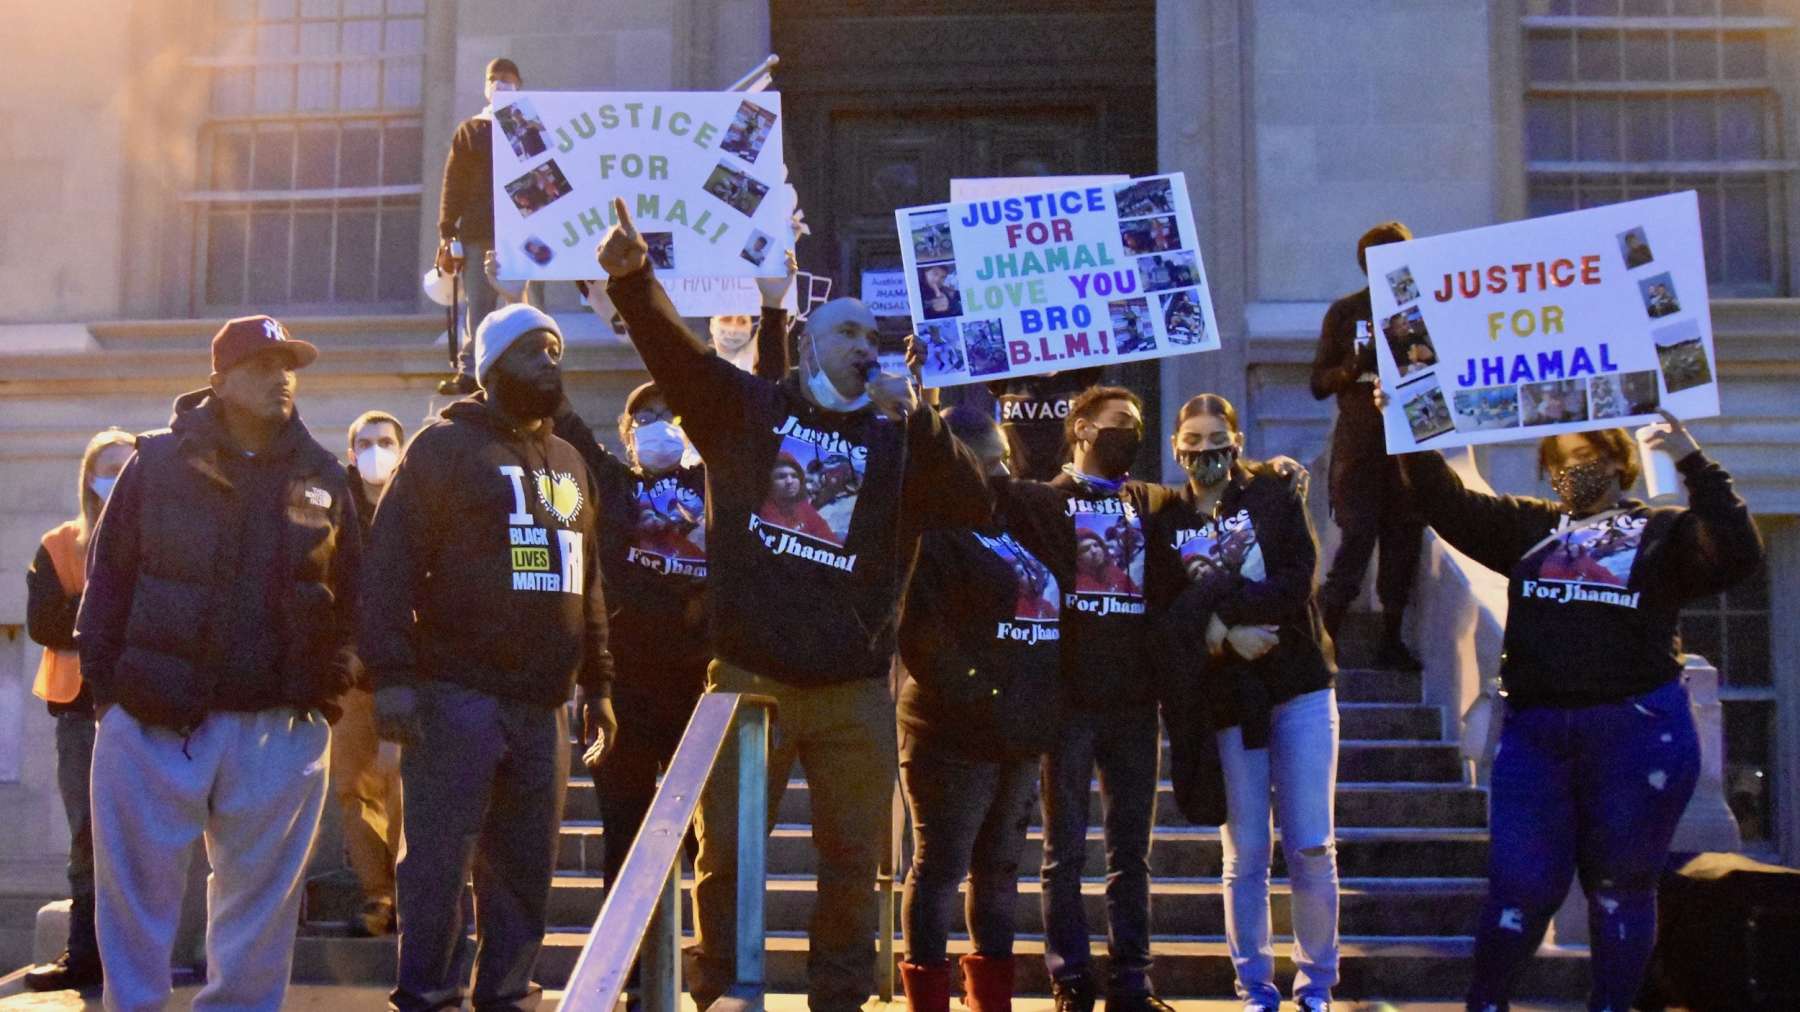 After peaceful Justice for Jhamal rally, protesters clash with police in Providence